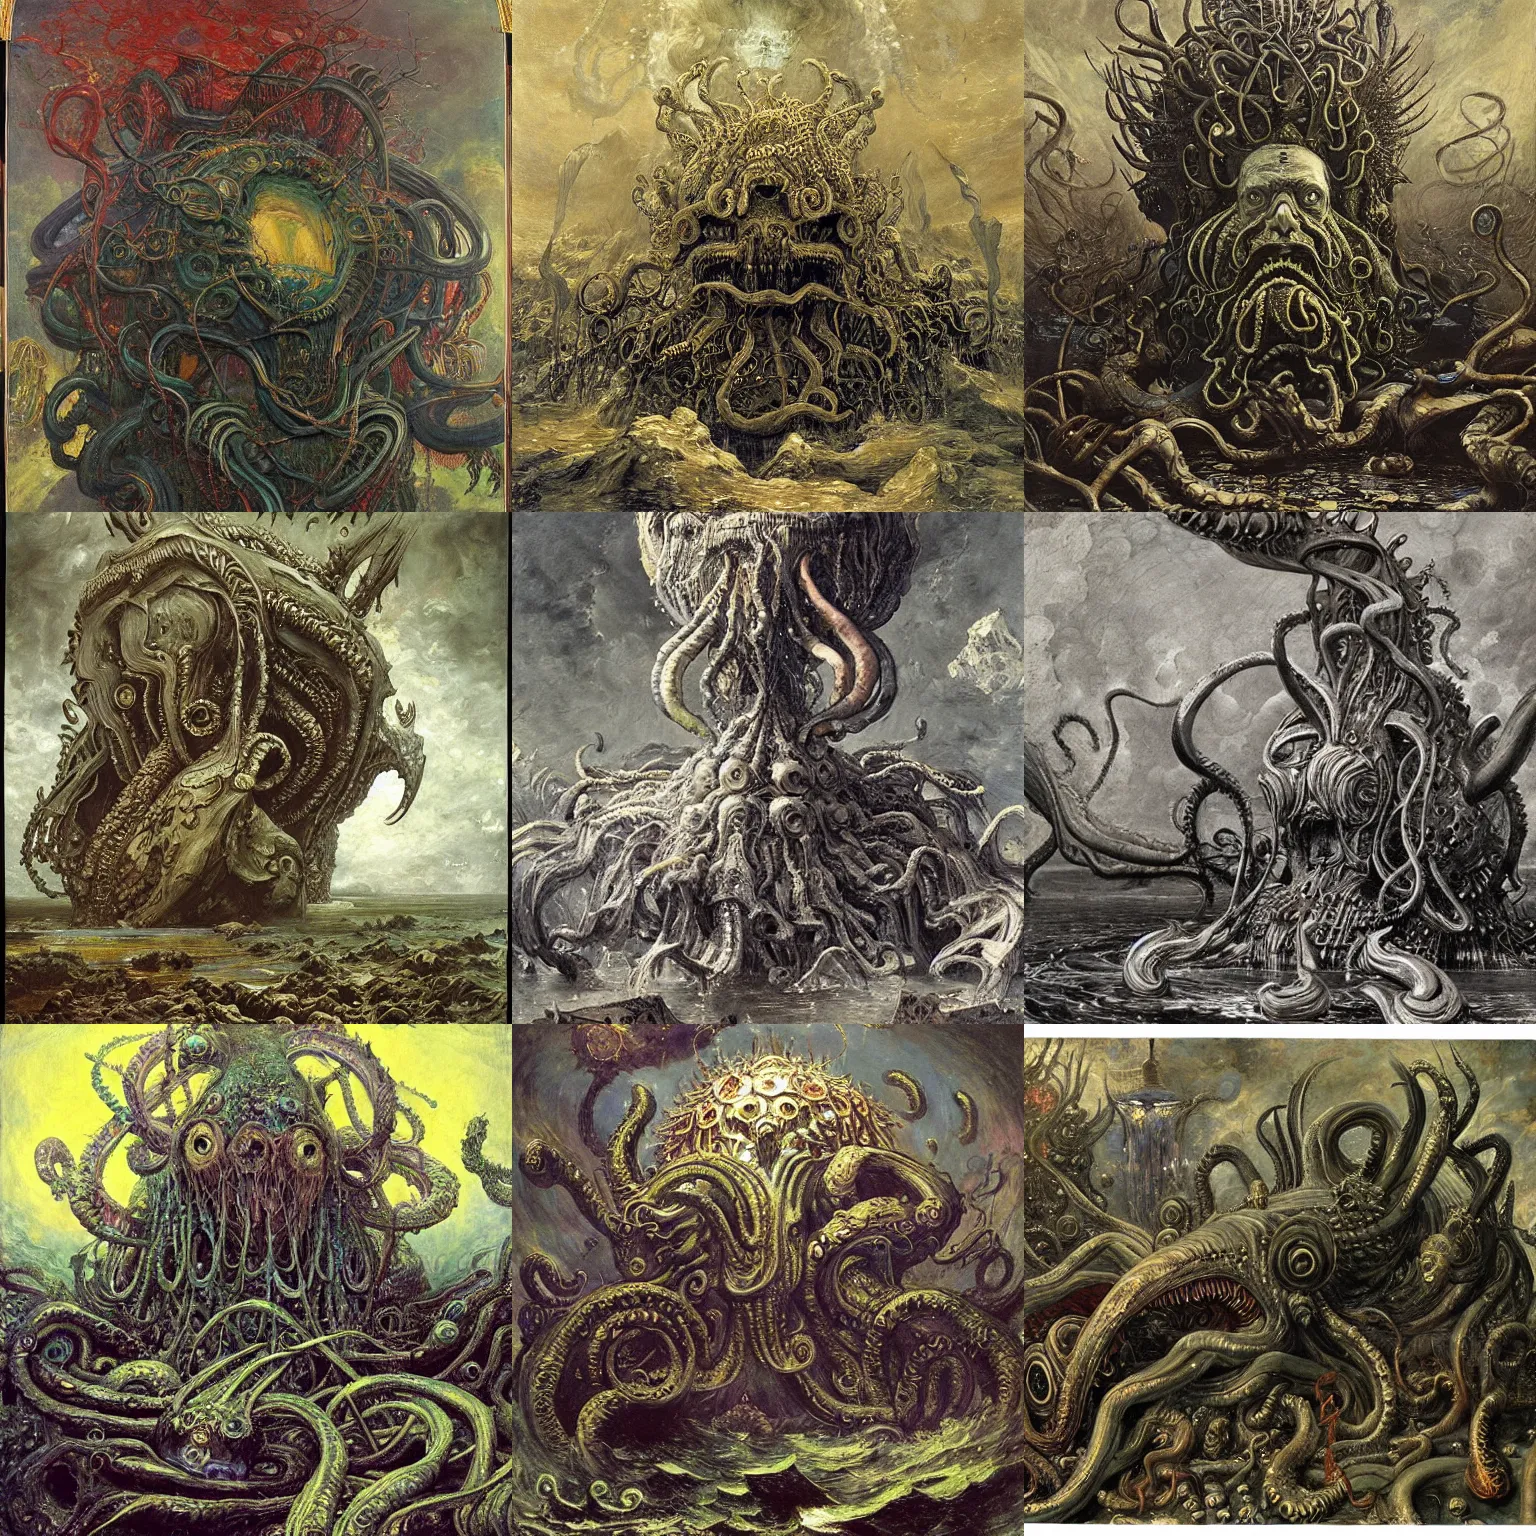 Prompt: inconceivably otherworldly elder god taking form, maximalism painting by dore, richard schmid, ilya repin, hp lovecraft,